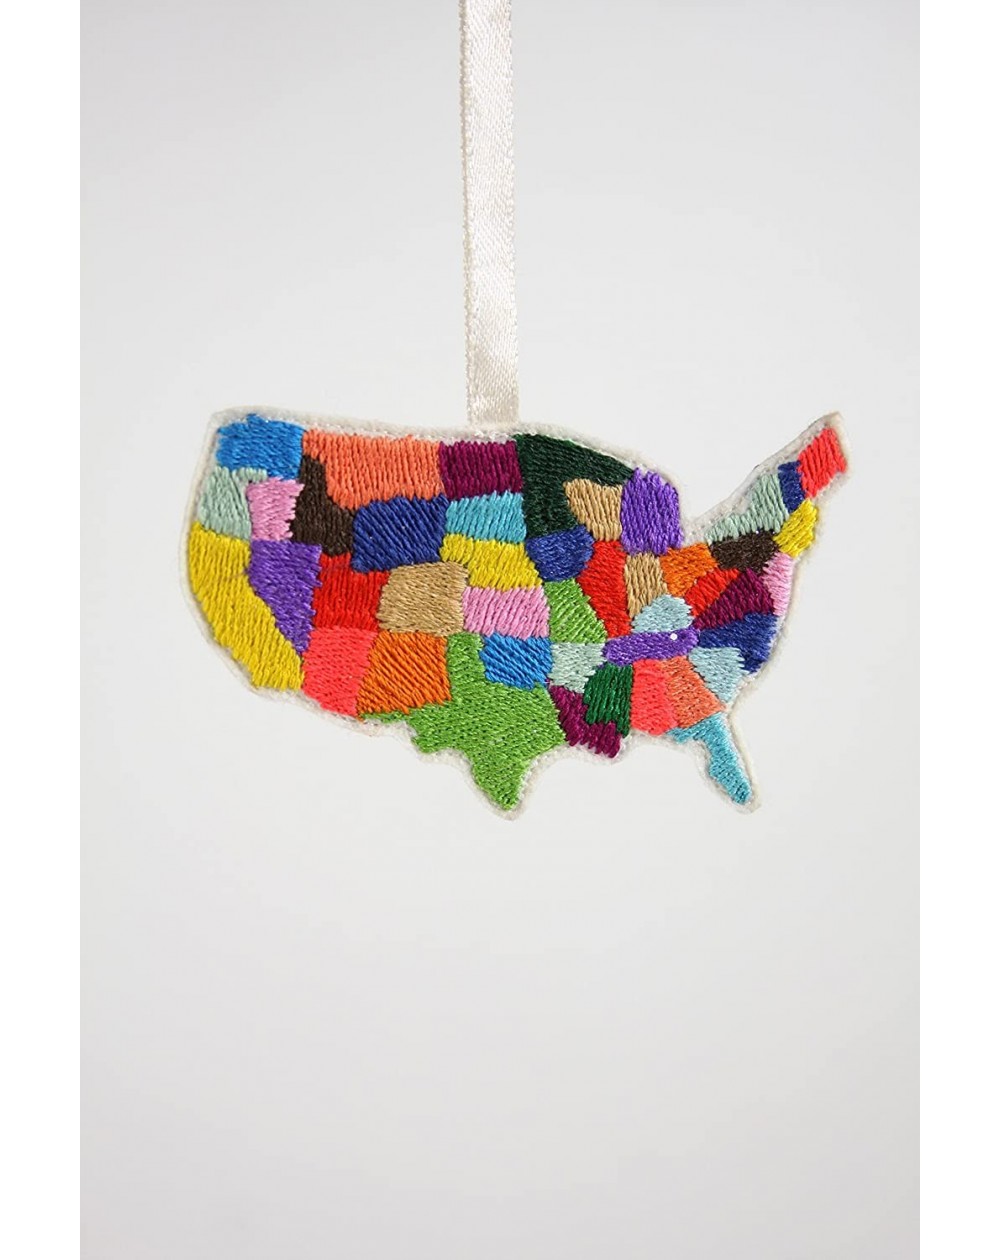 Ornaments Patchwork USA Colorful Ornament Cody Foster - C01898TTYOW $10.98